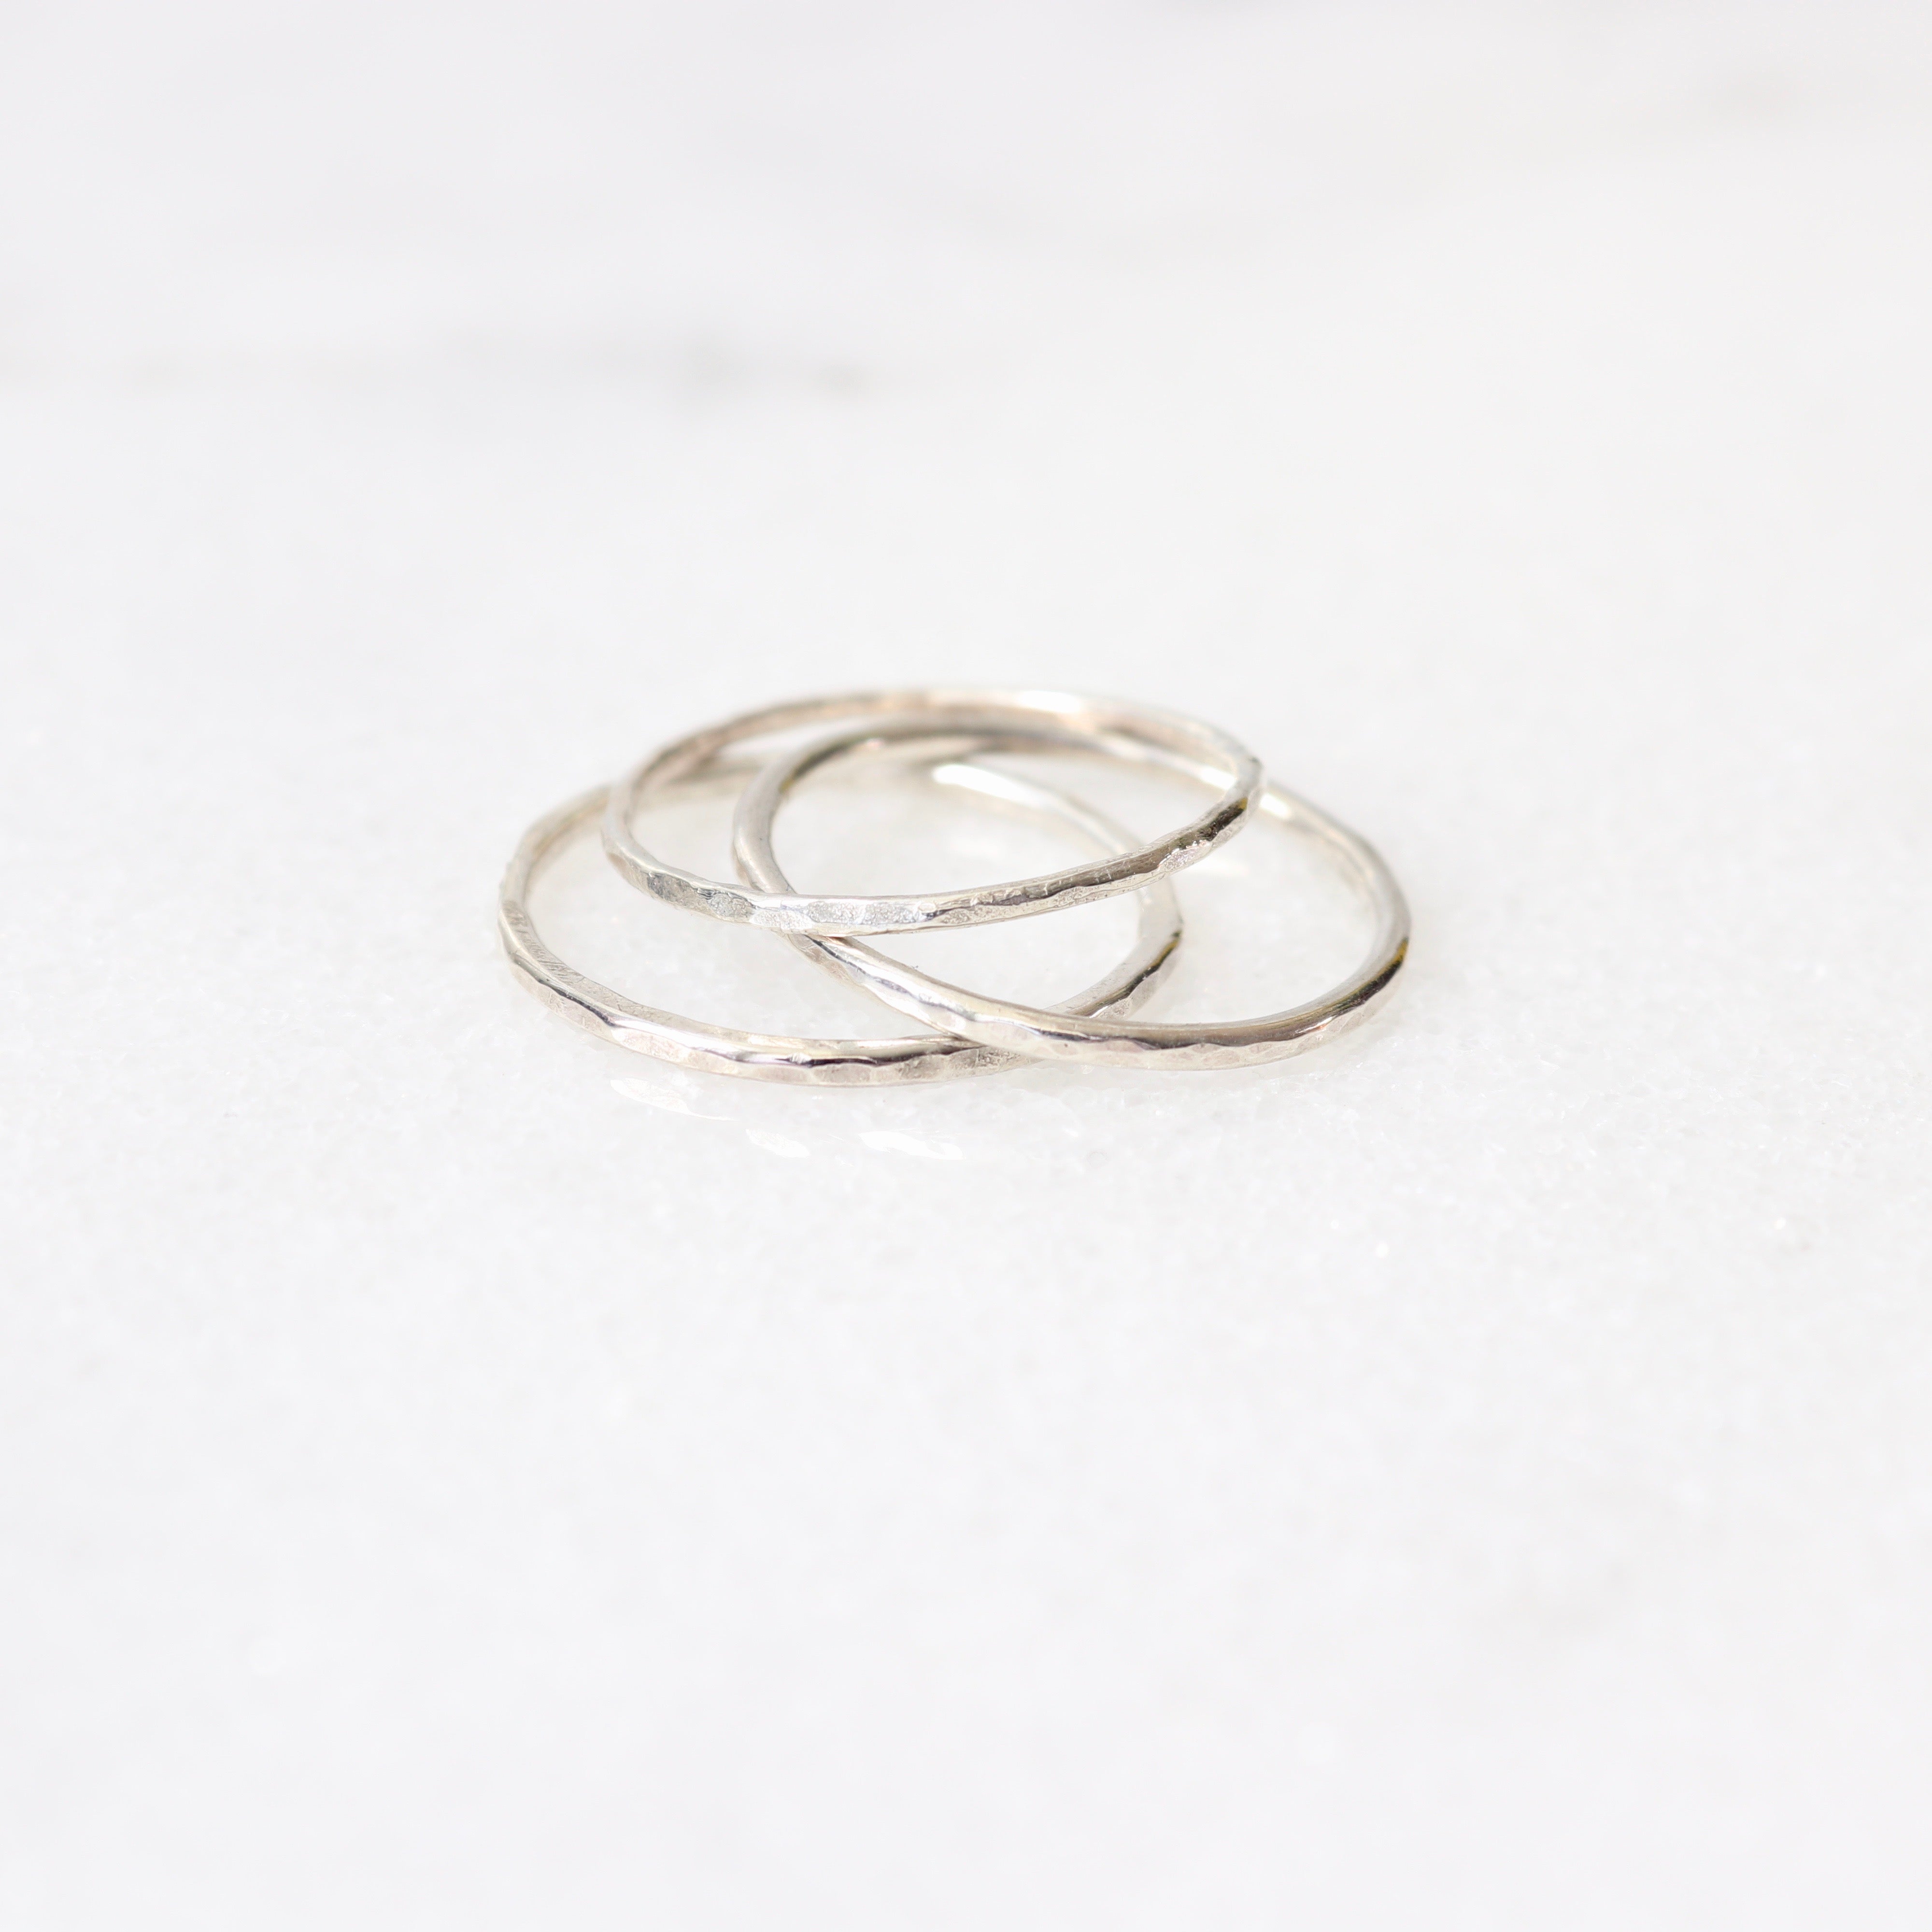 silver hammered stacking ring